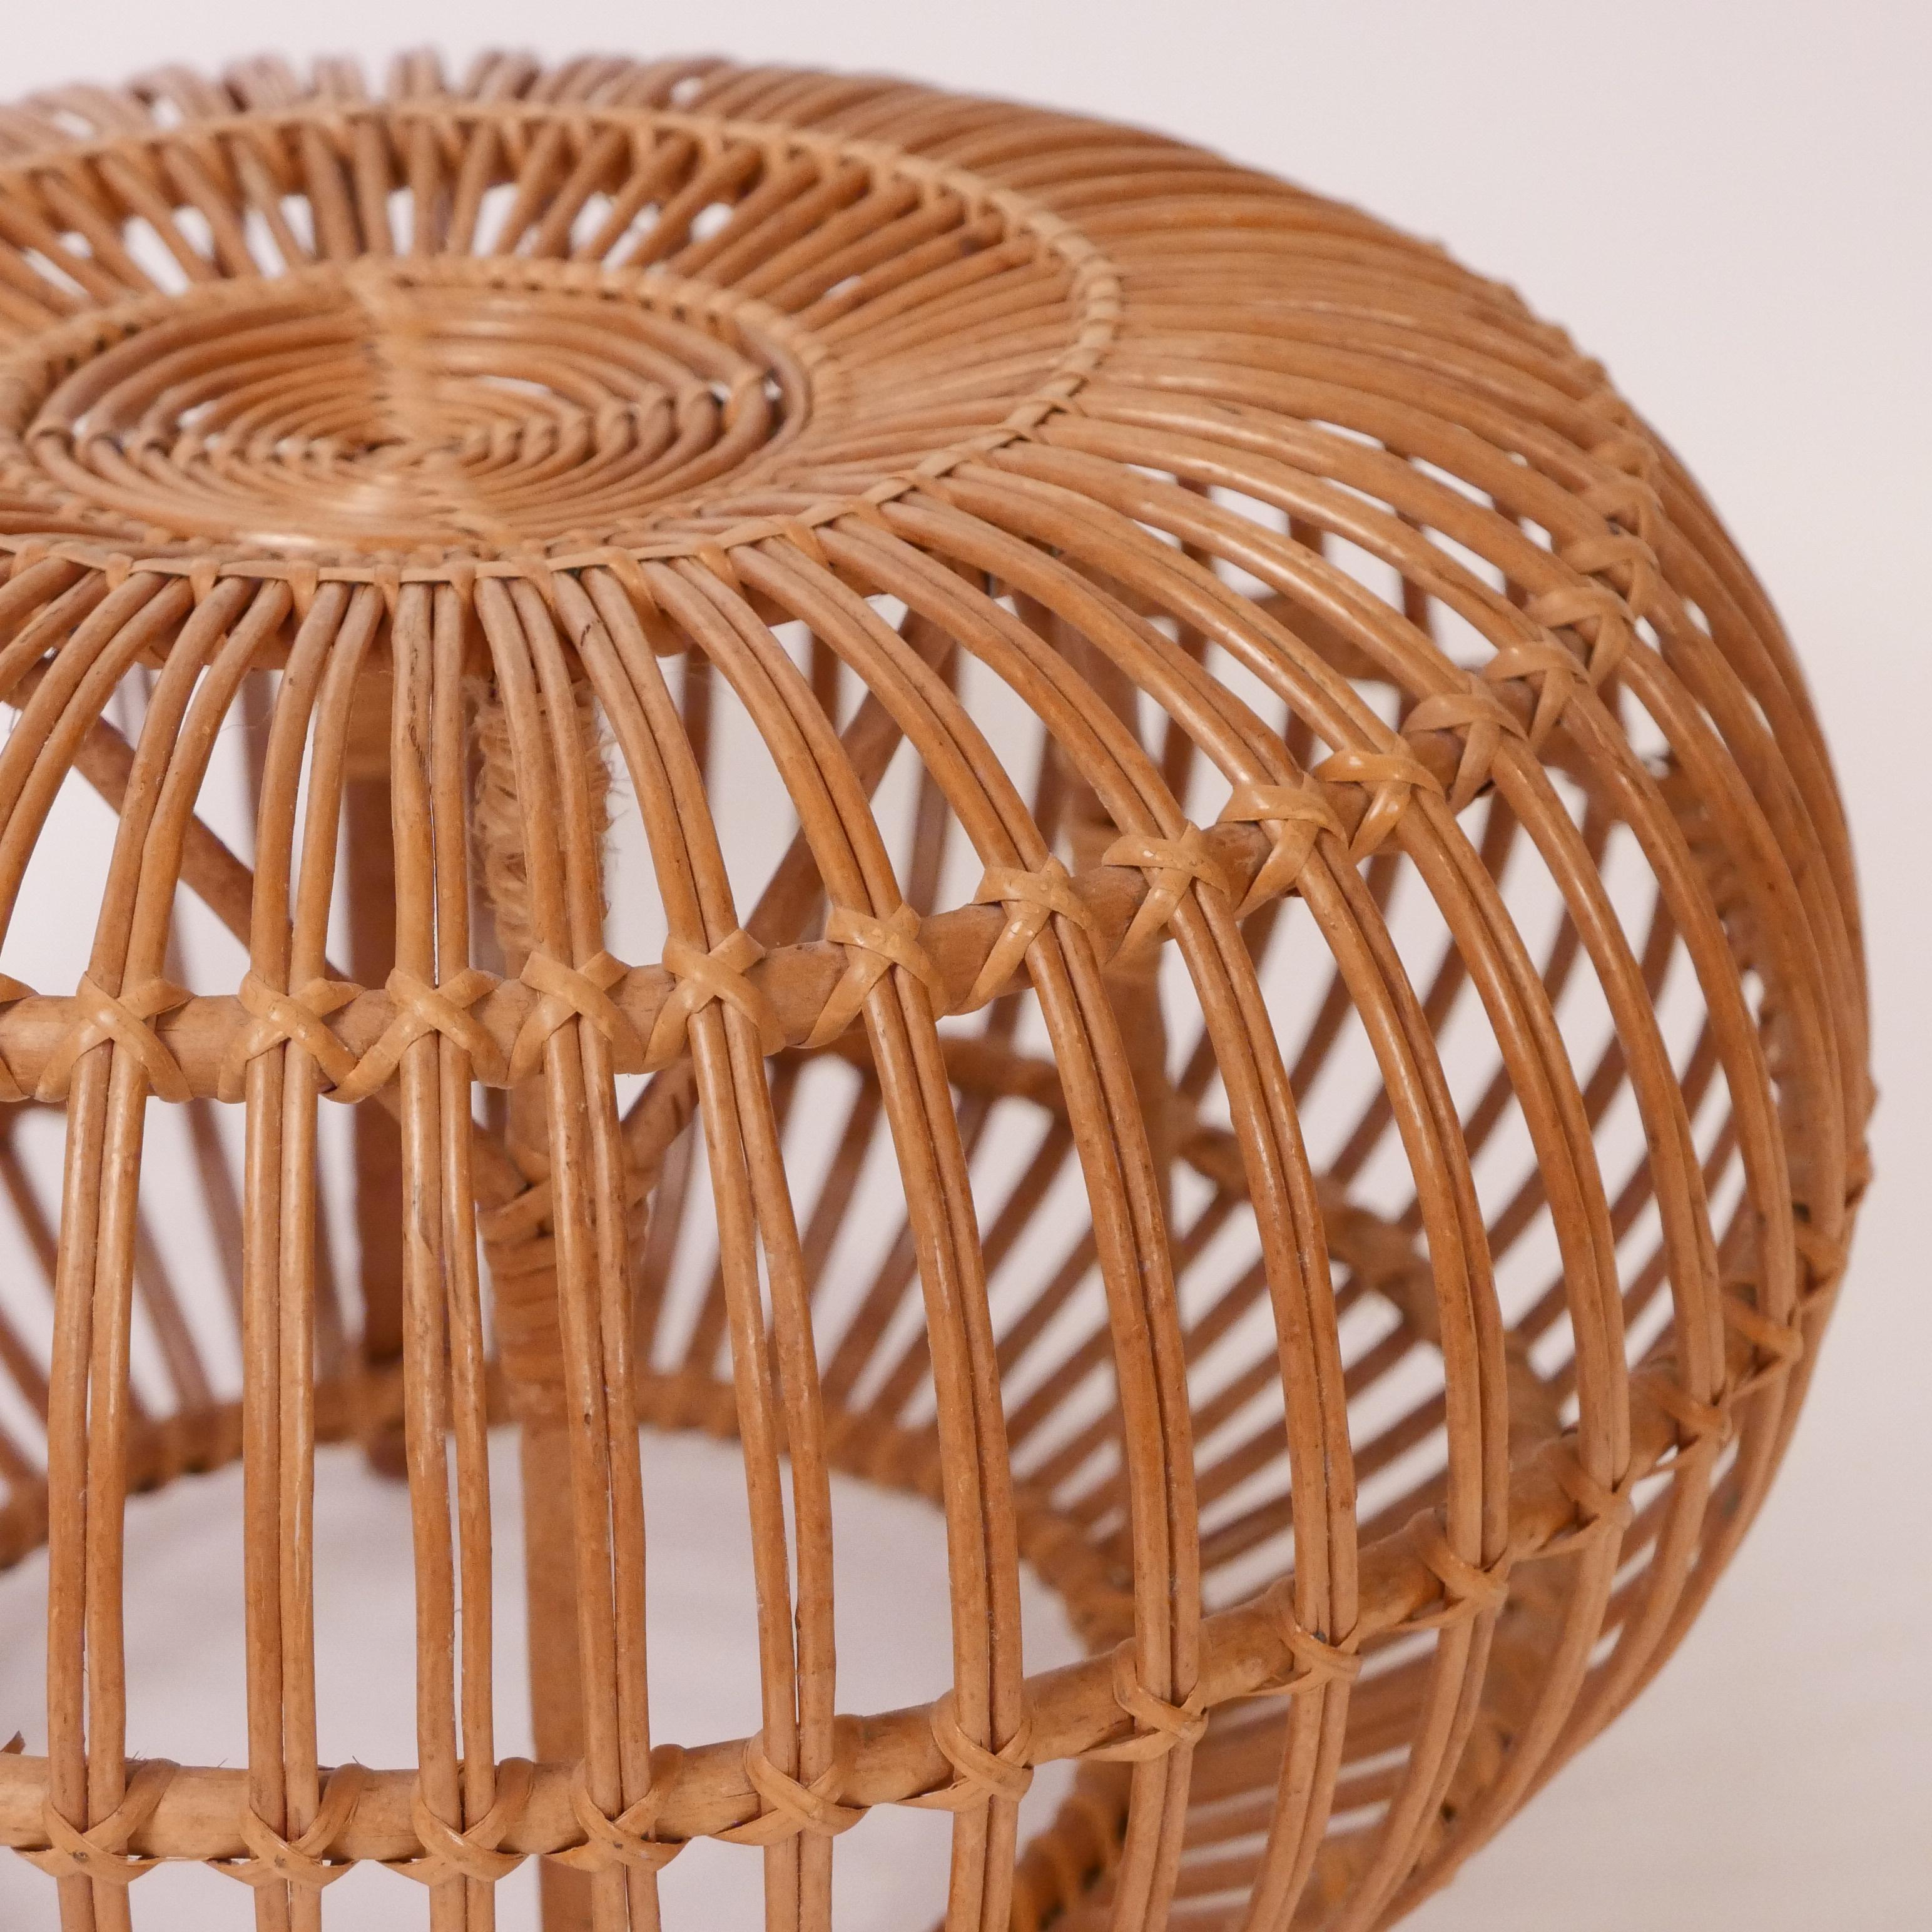 20th Century Pair of Wicker or Rattan Ottoman, Stool or End Tables by Franco Albini